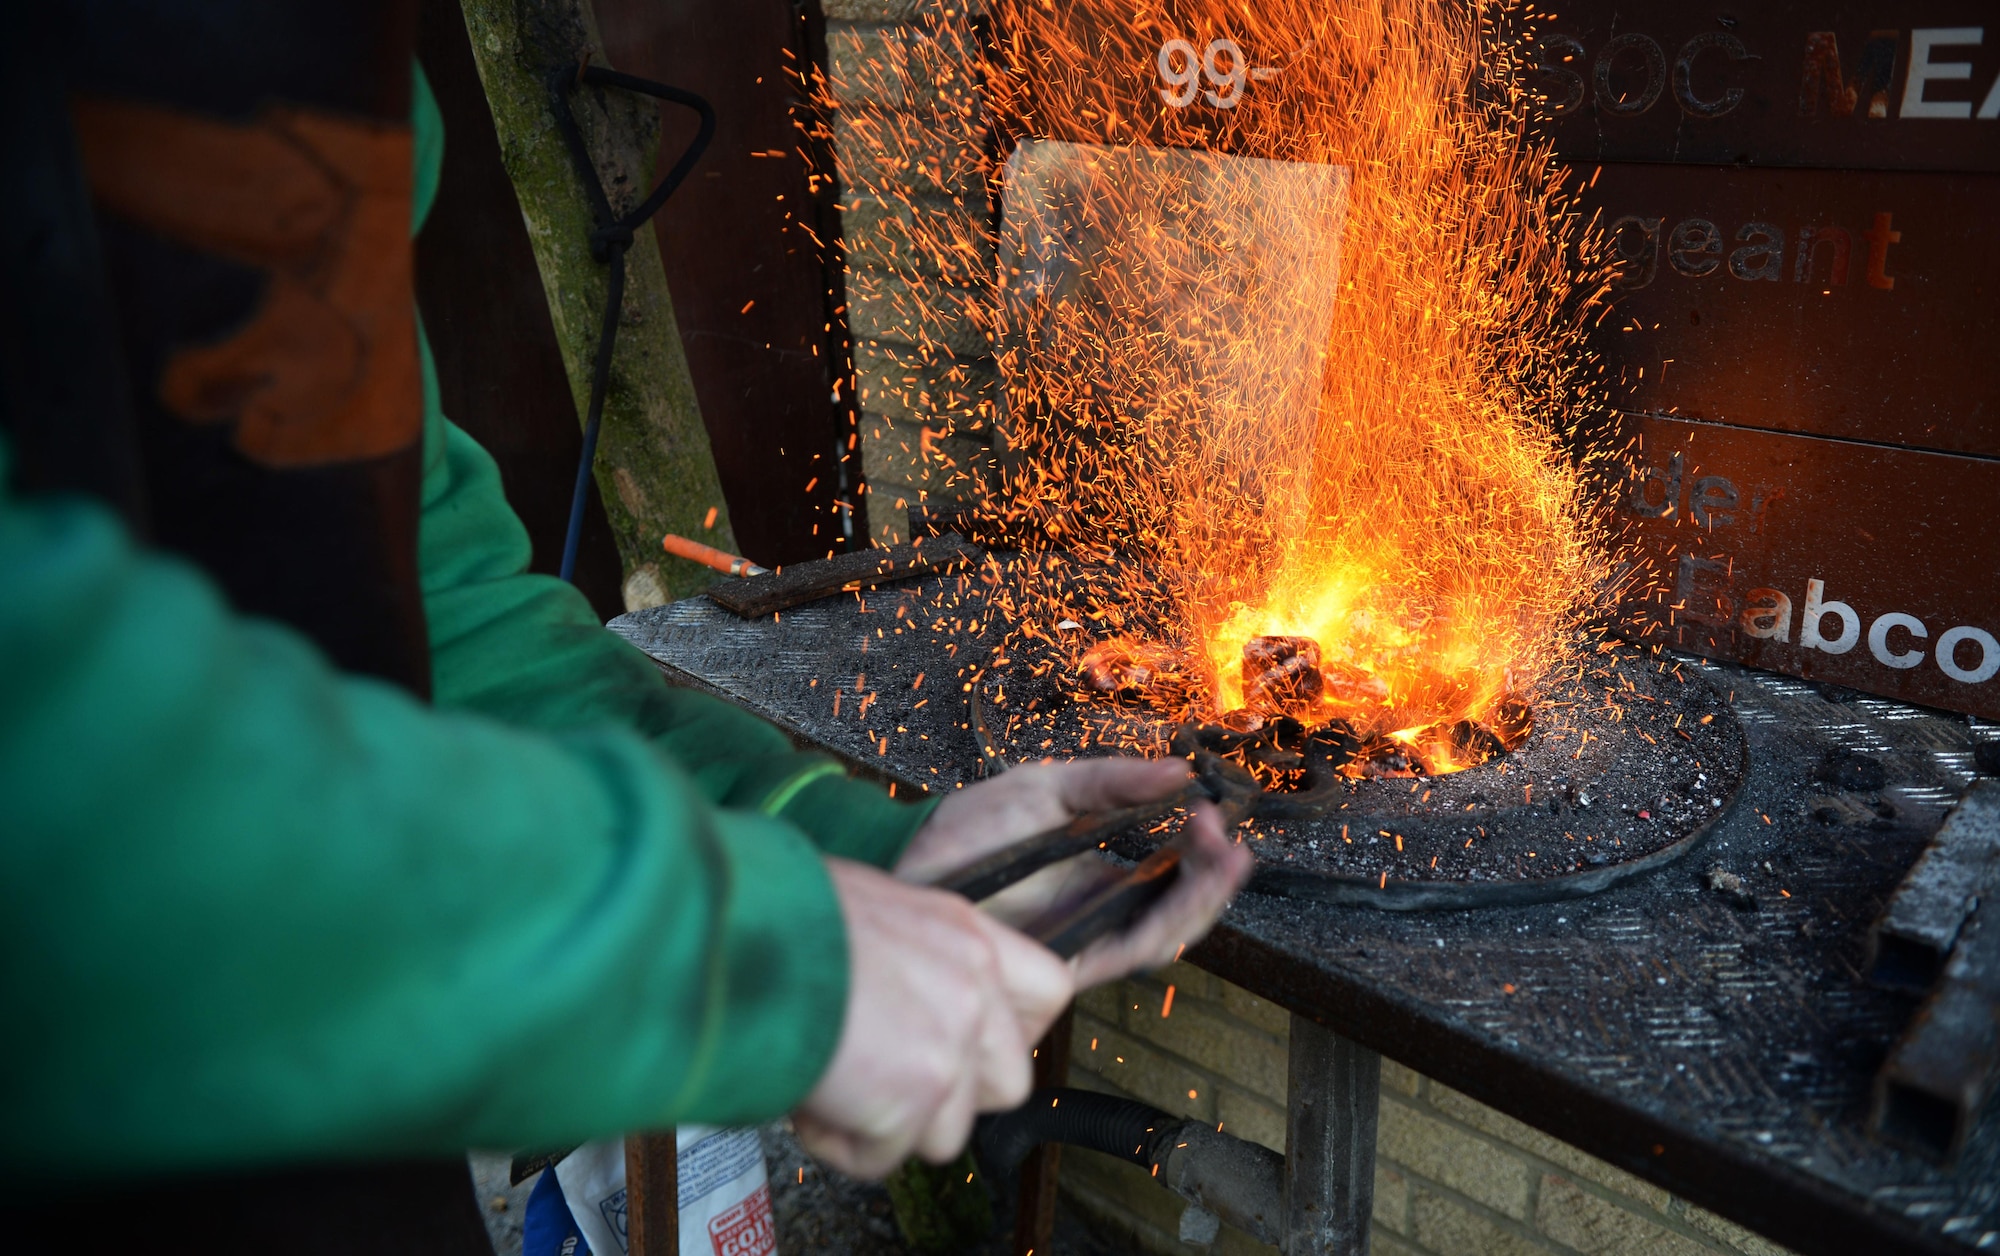 U.S. Air Force Tech. Sgt. Steven Pyott, 100th Security Forces Squadron standards and evaluations sections evaluator and blacksmith, inserts the steel into the fire Feb. 11, 2017, in Suffolk, England. The steel heats rapidly because the coals act like an oven, trapping the heat. (U.S. Air Force photo by Airman 1st Class Tenley Long)